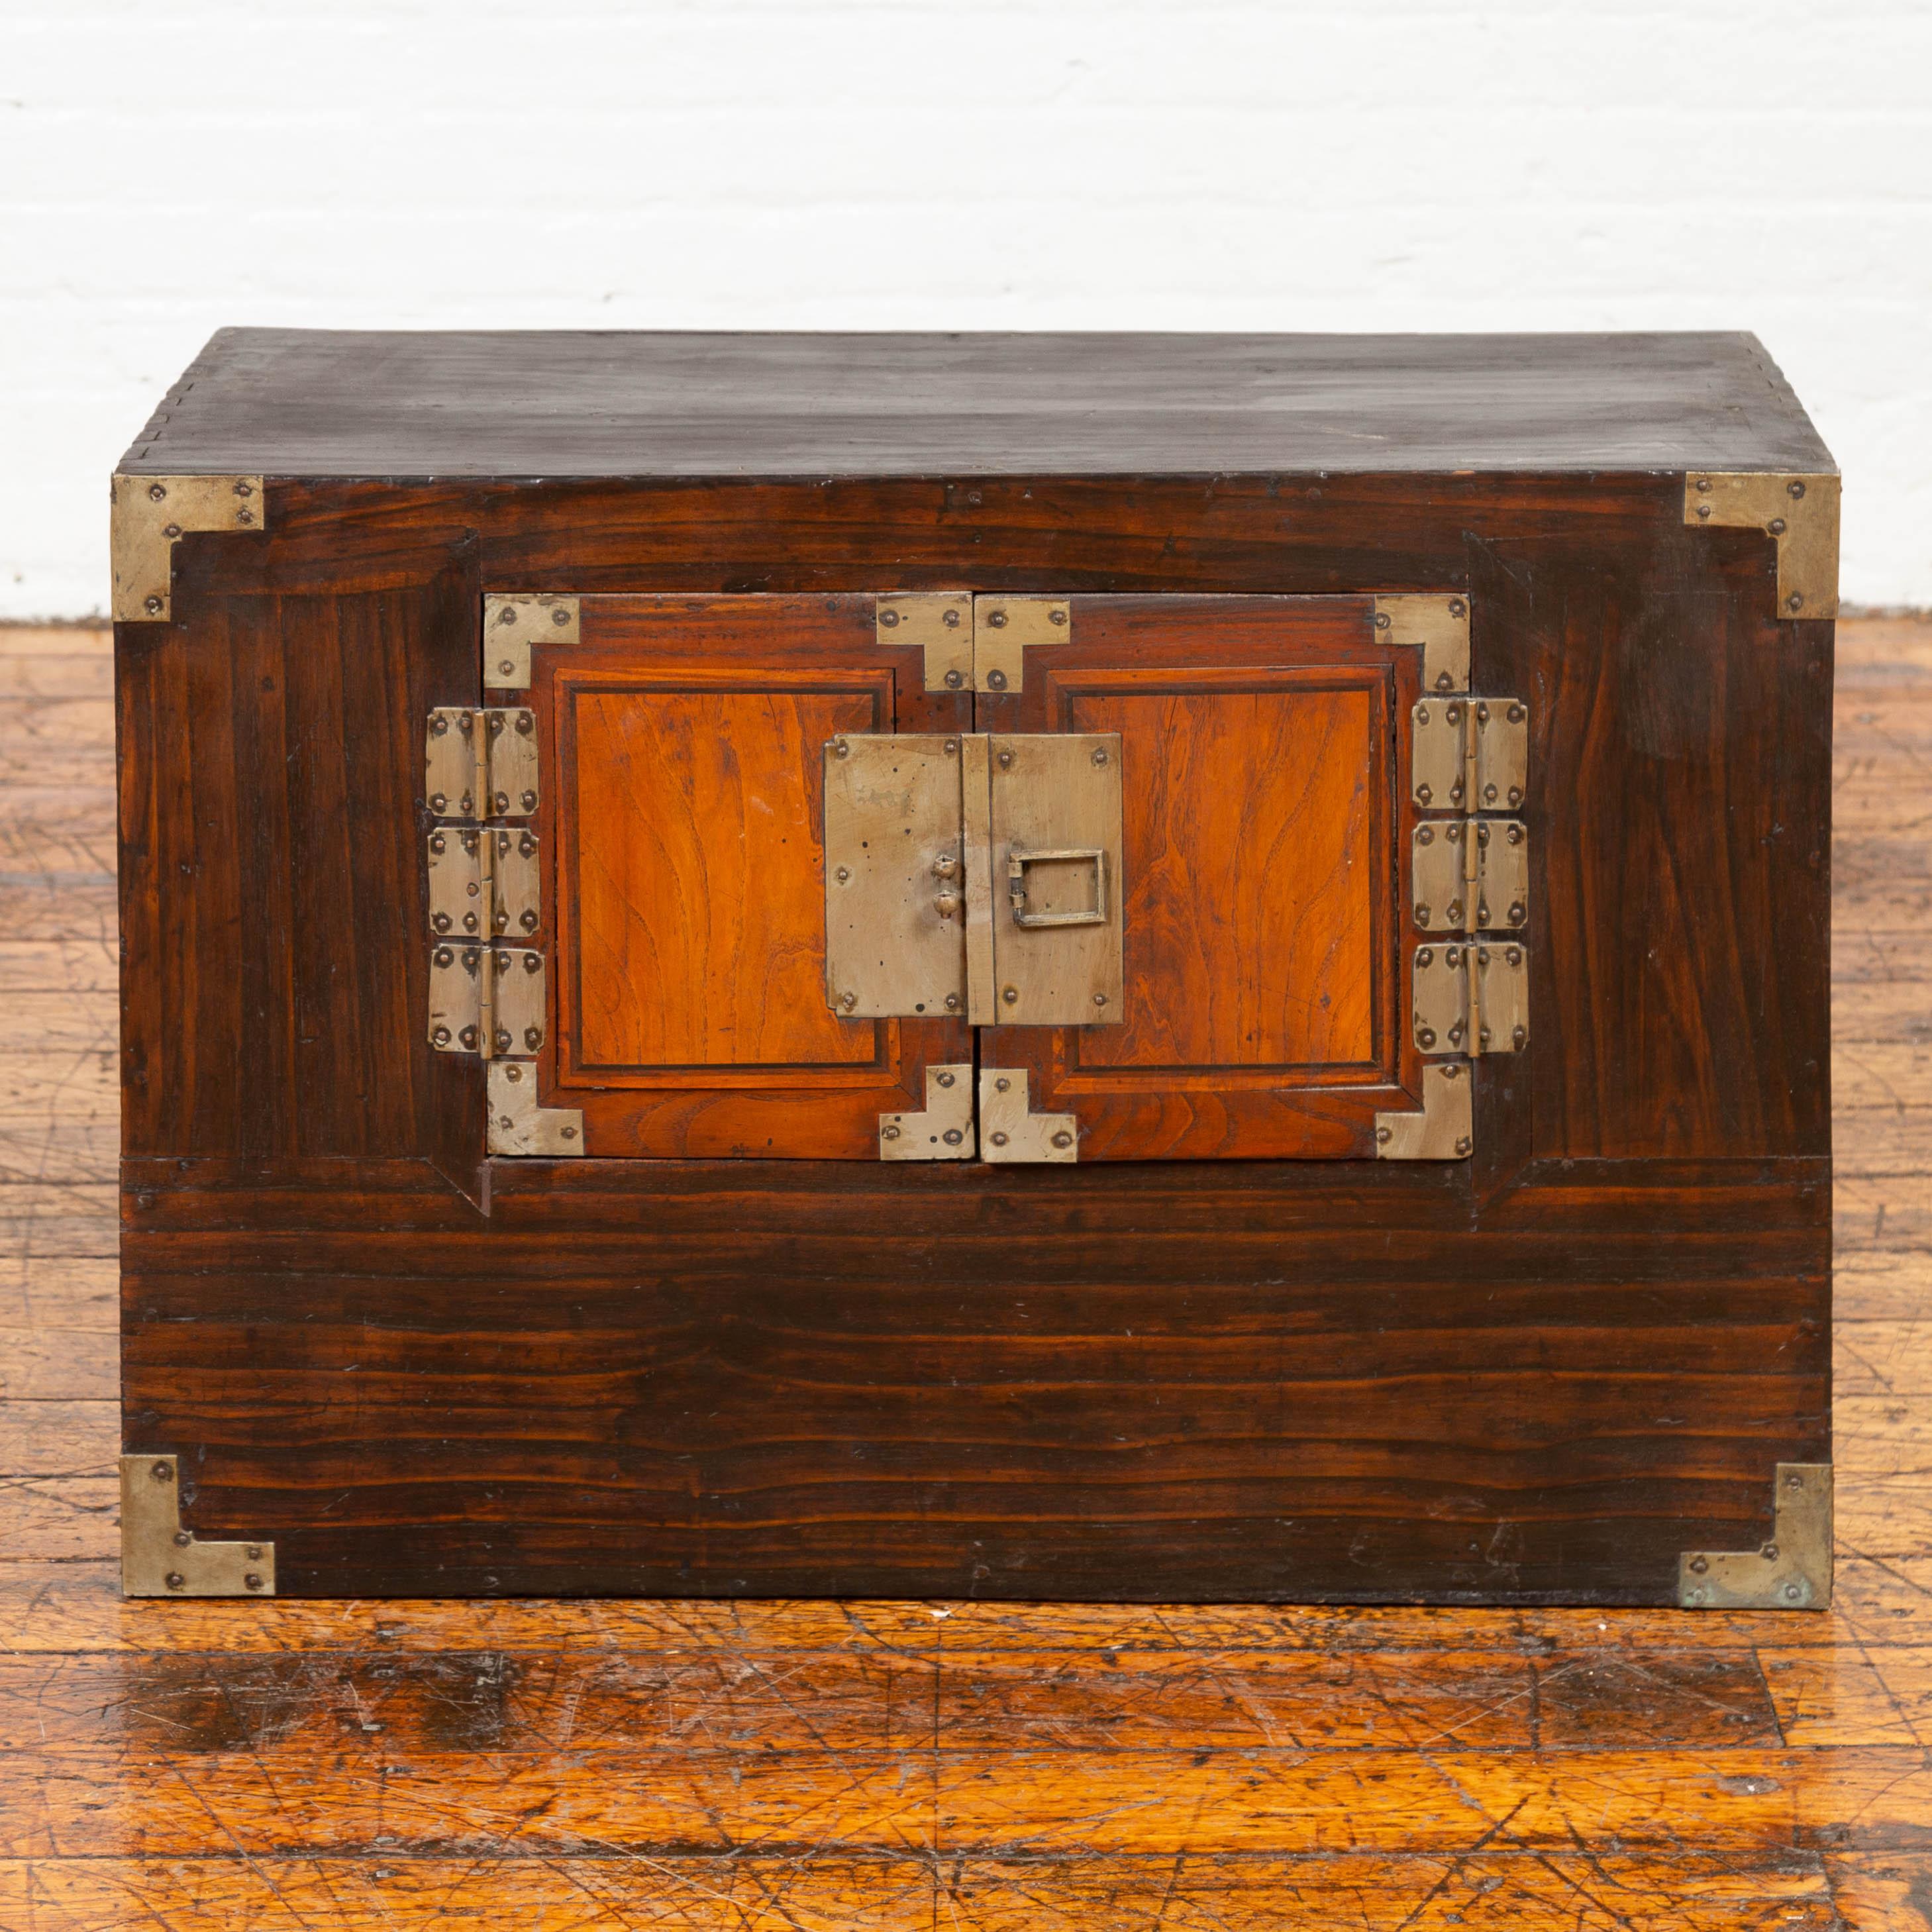 A Korean wooden two-toned side chest from the late 19th-early 20th century, with double doors and brass hardware. This Korean cabinet features a rectangular top sitting above a two-toned façade, made of petite double doors, accented with brass